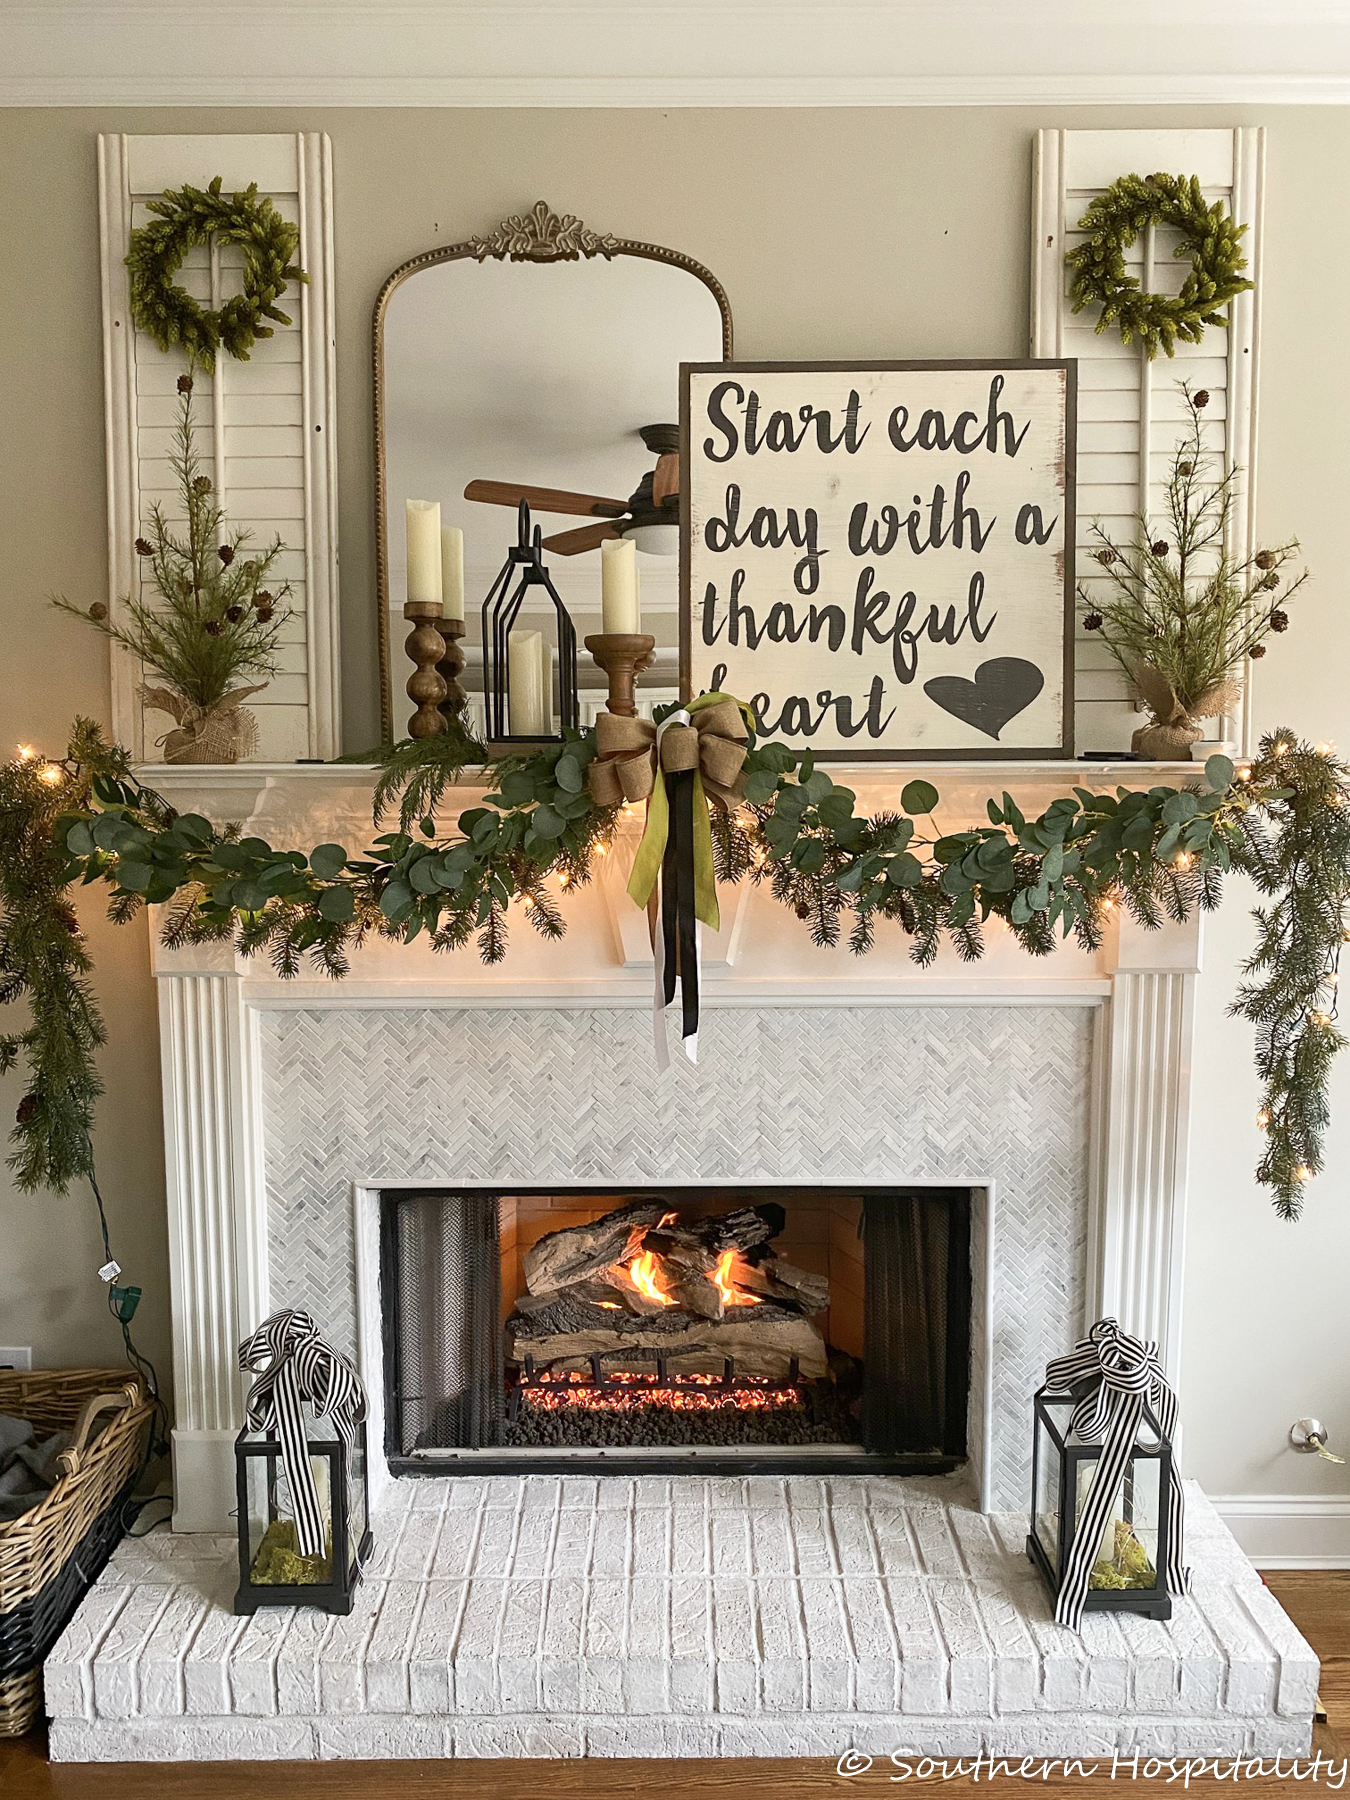 Cozy Winter Decorating Ideas - Southern Hospitality